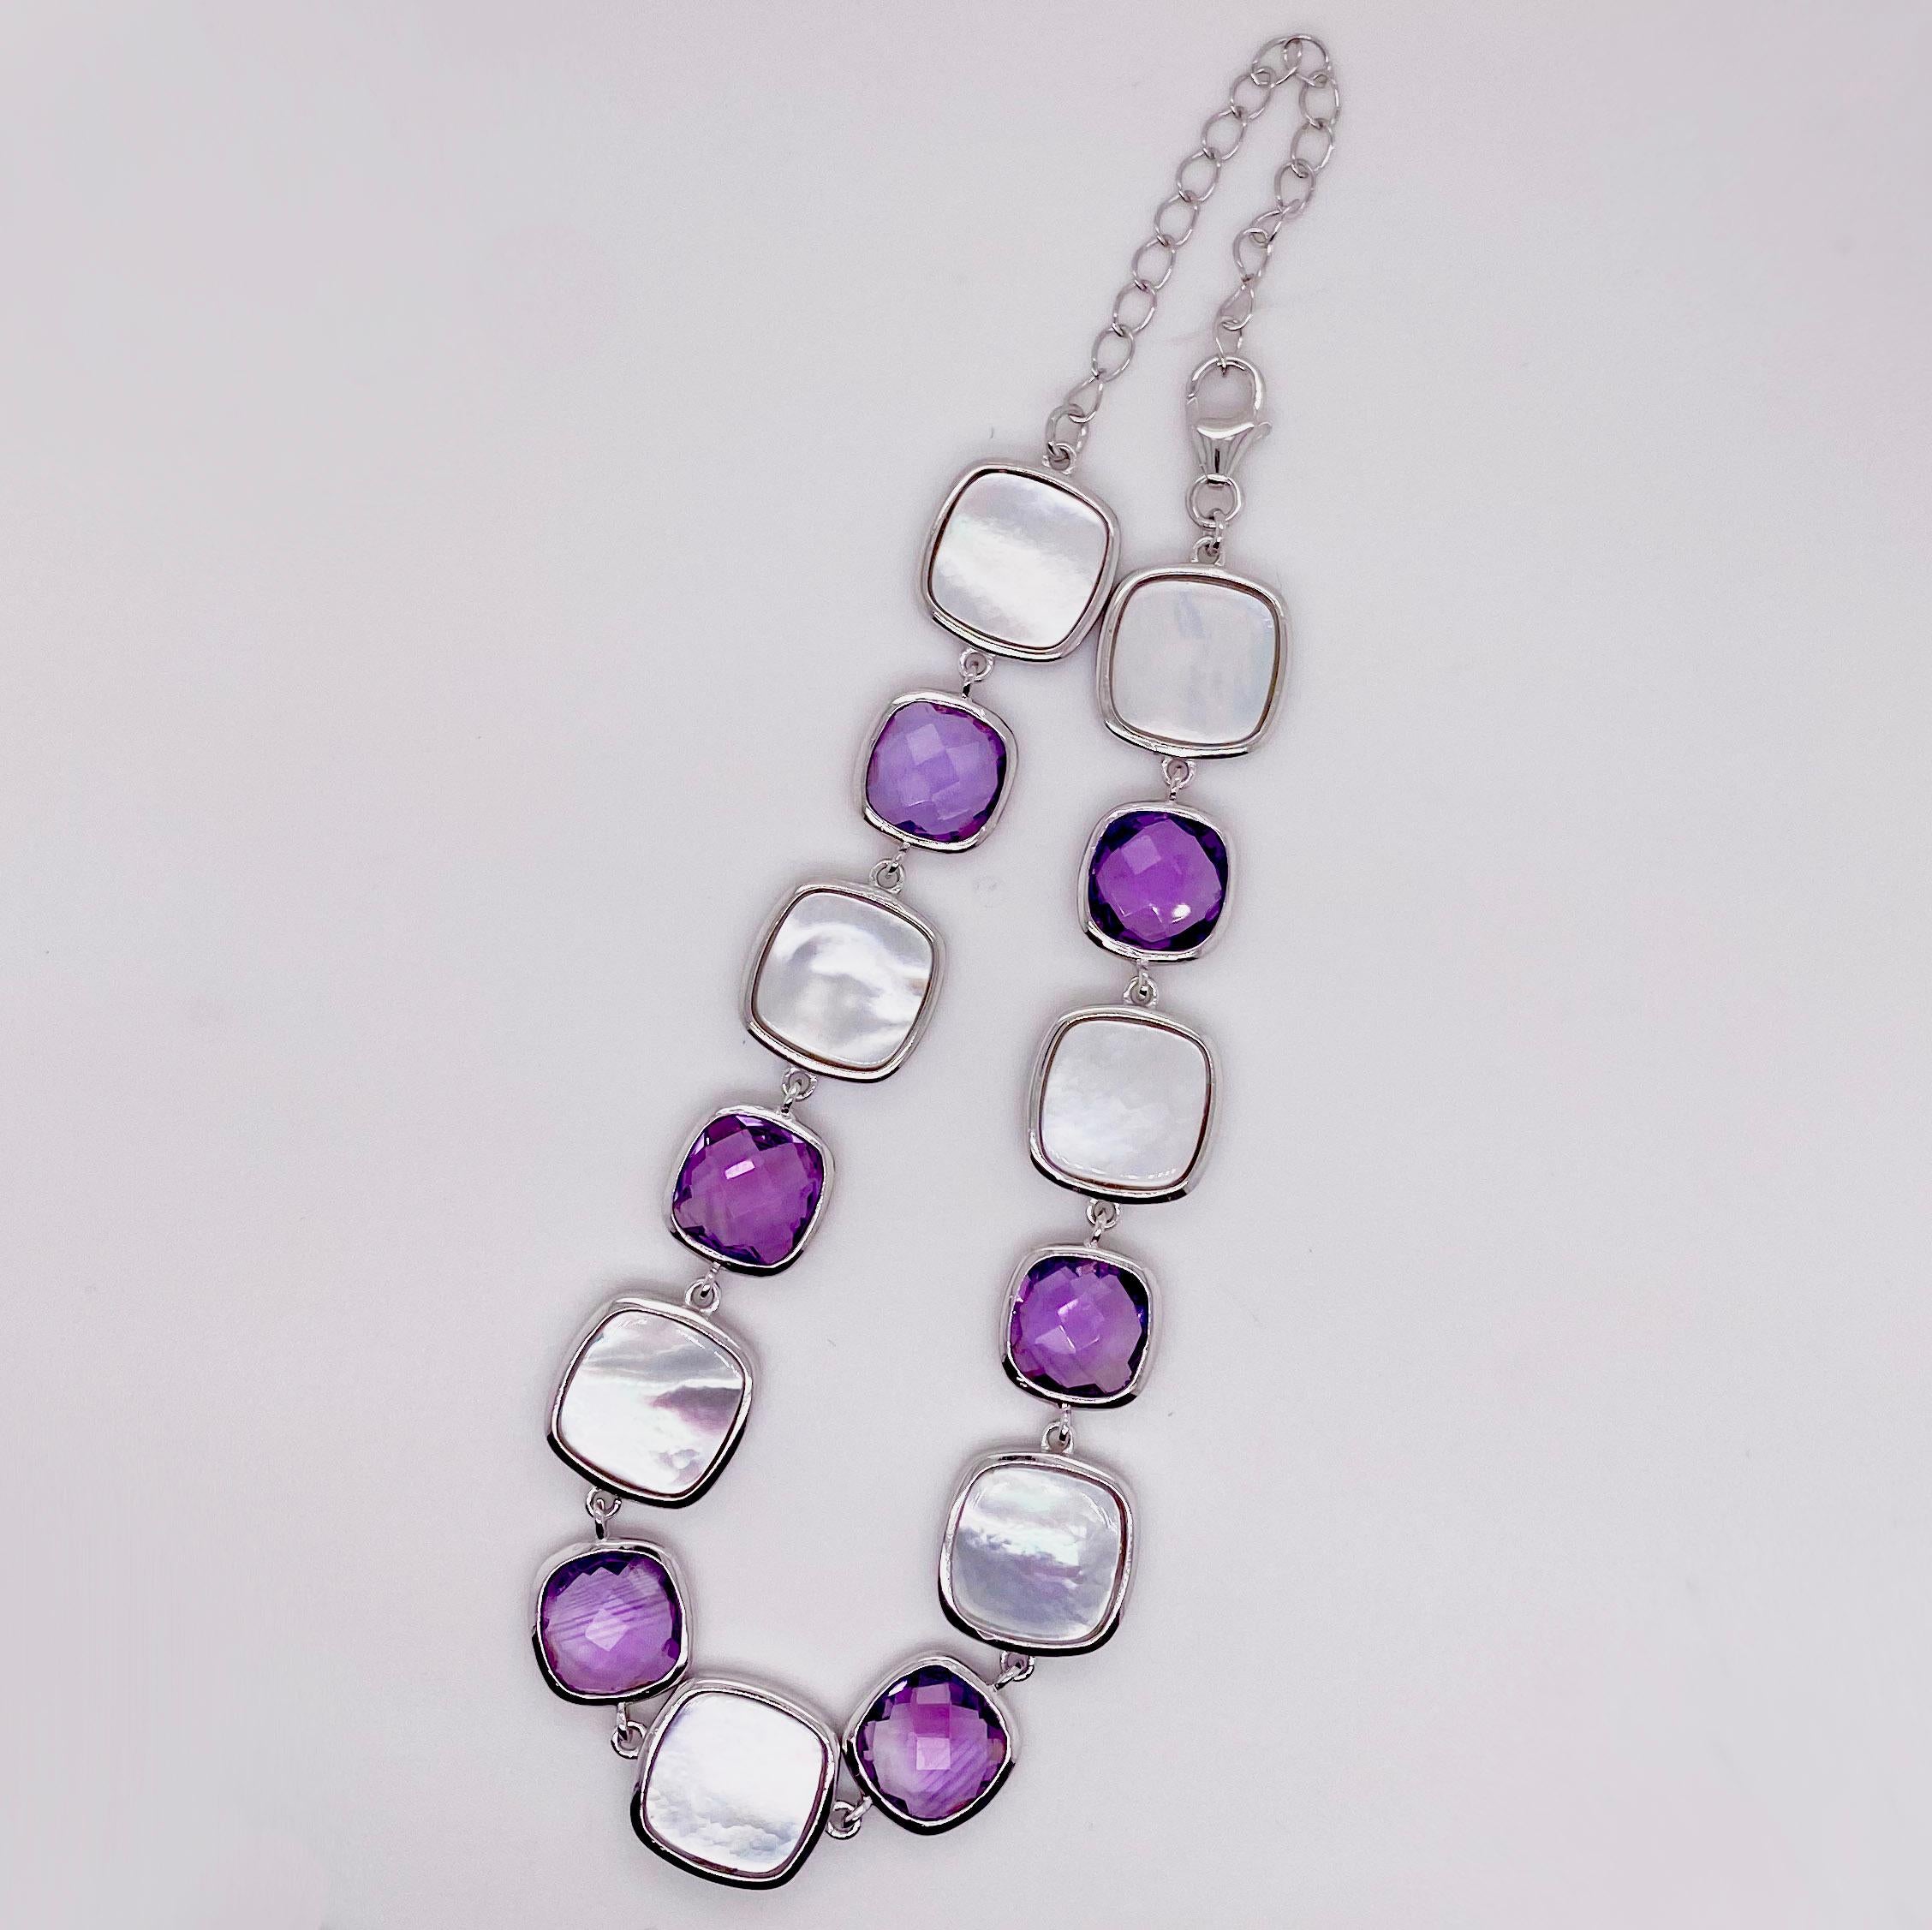 Amethyst and Mother-of-Pearl look fabulous together! The bezels around each gemstone are very secure and this bracelet will fit any size of wrist from small to large. The iridescence of the stones look incredible set in the white metal of the